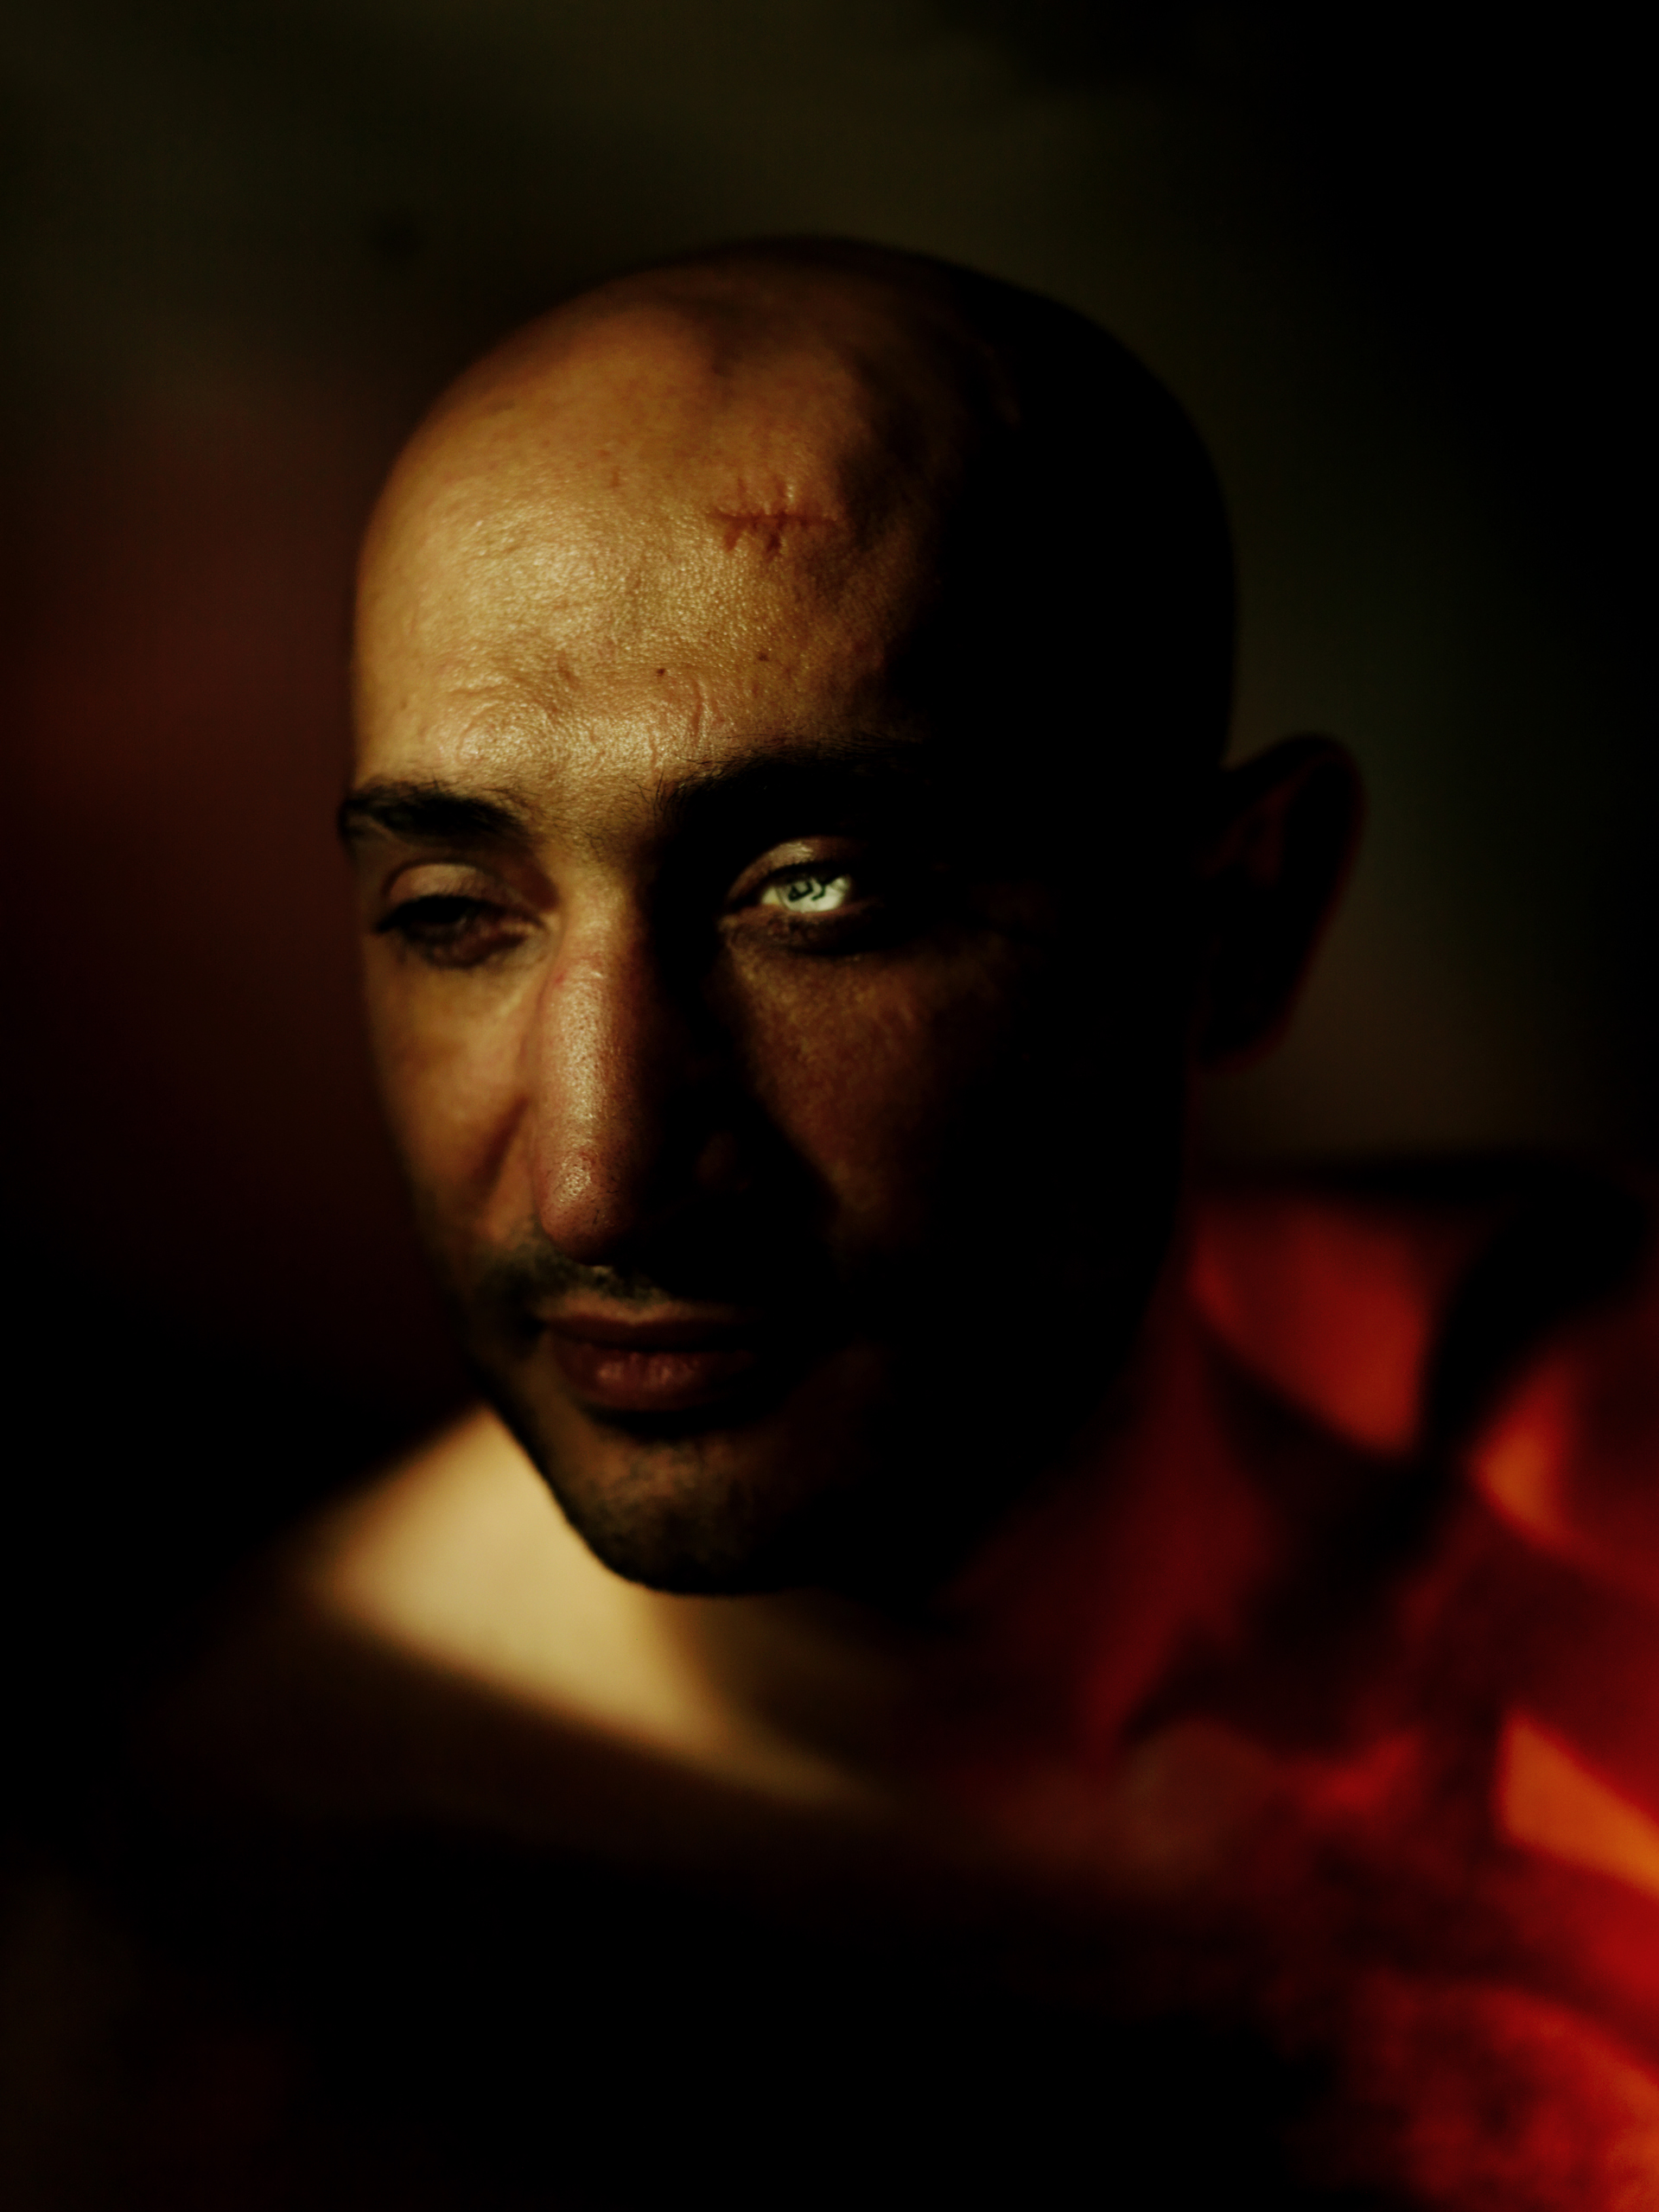 Ahmed Hararah, poses with his left emptied socket, wearing
                              a glass eye on which is written in Arabic, 'Horreya' (in English, 'freedom'). He lost both of his eyes fighting for the revolution. Cairo, Egypt, Oct. 28, 2015.